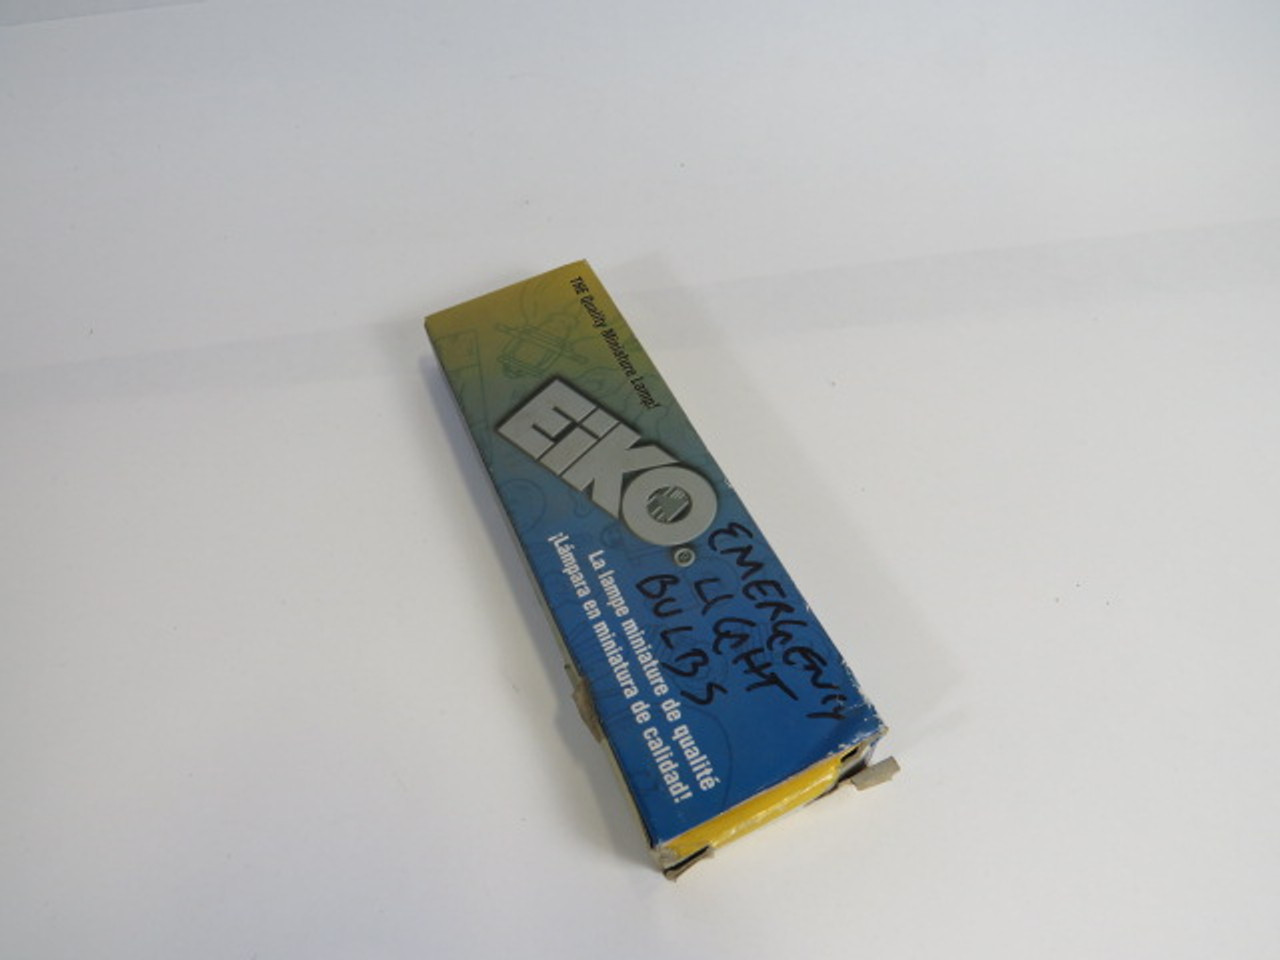 Eiko 908 Wedge Based Miniature Lamp 1.5A 6V Lot of 9 ! NEW !